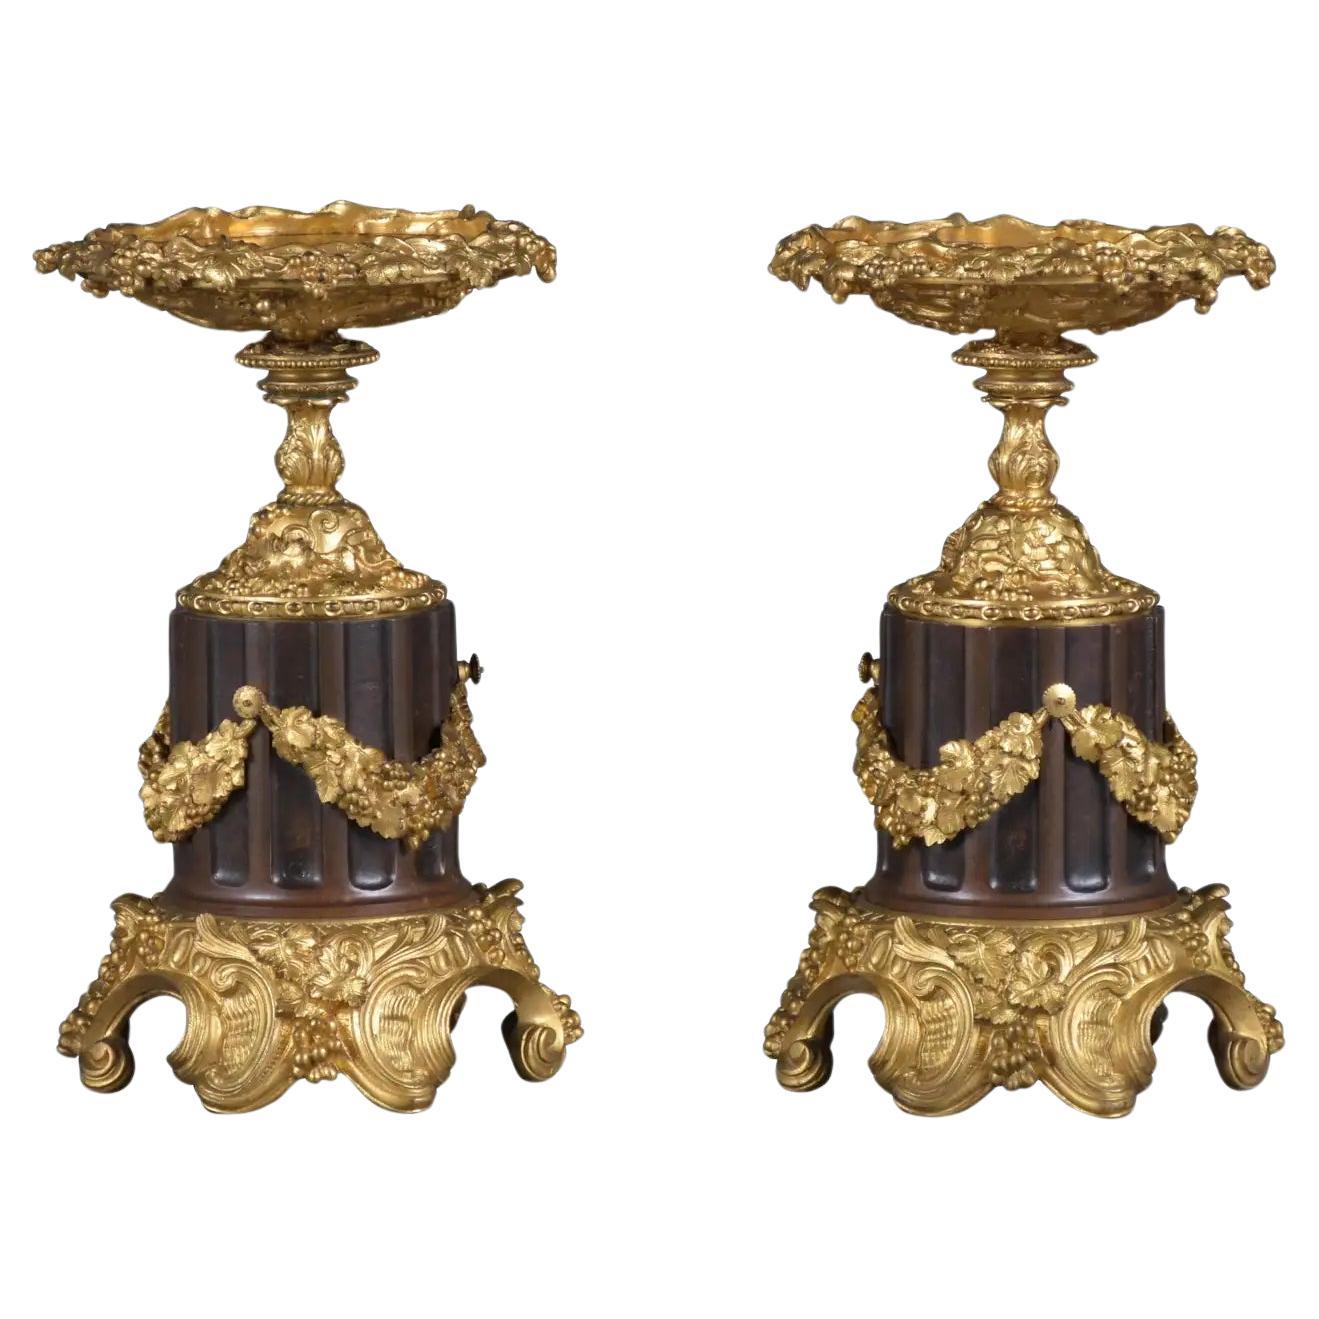 Early 19th-Century French Bronzed Urns with Gold-Plated Garland Decoration For Sale